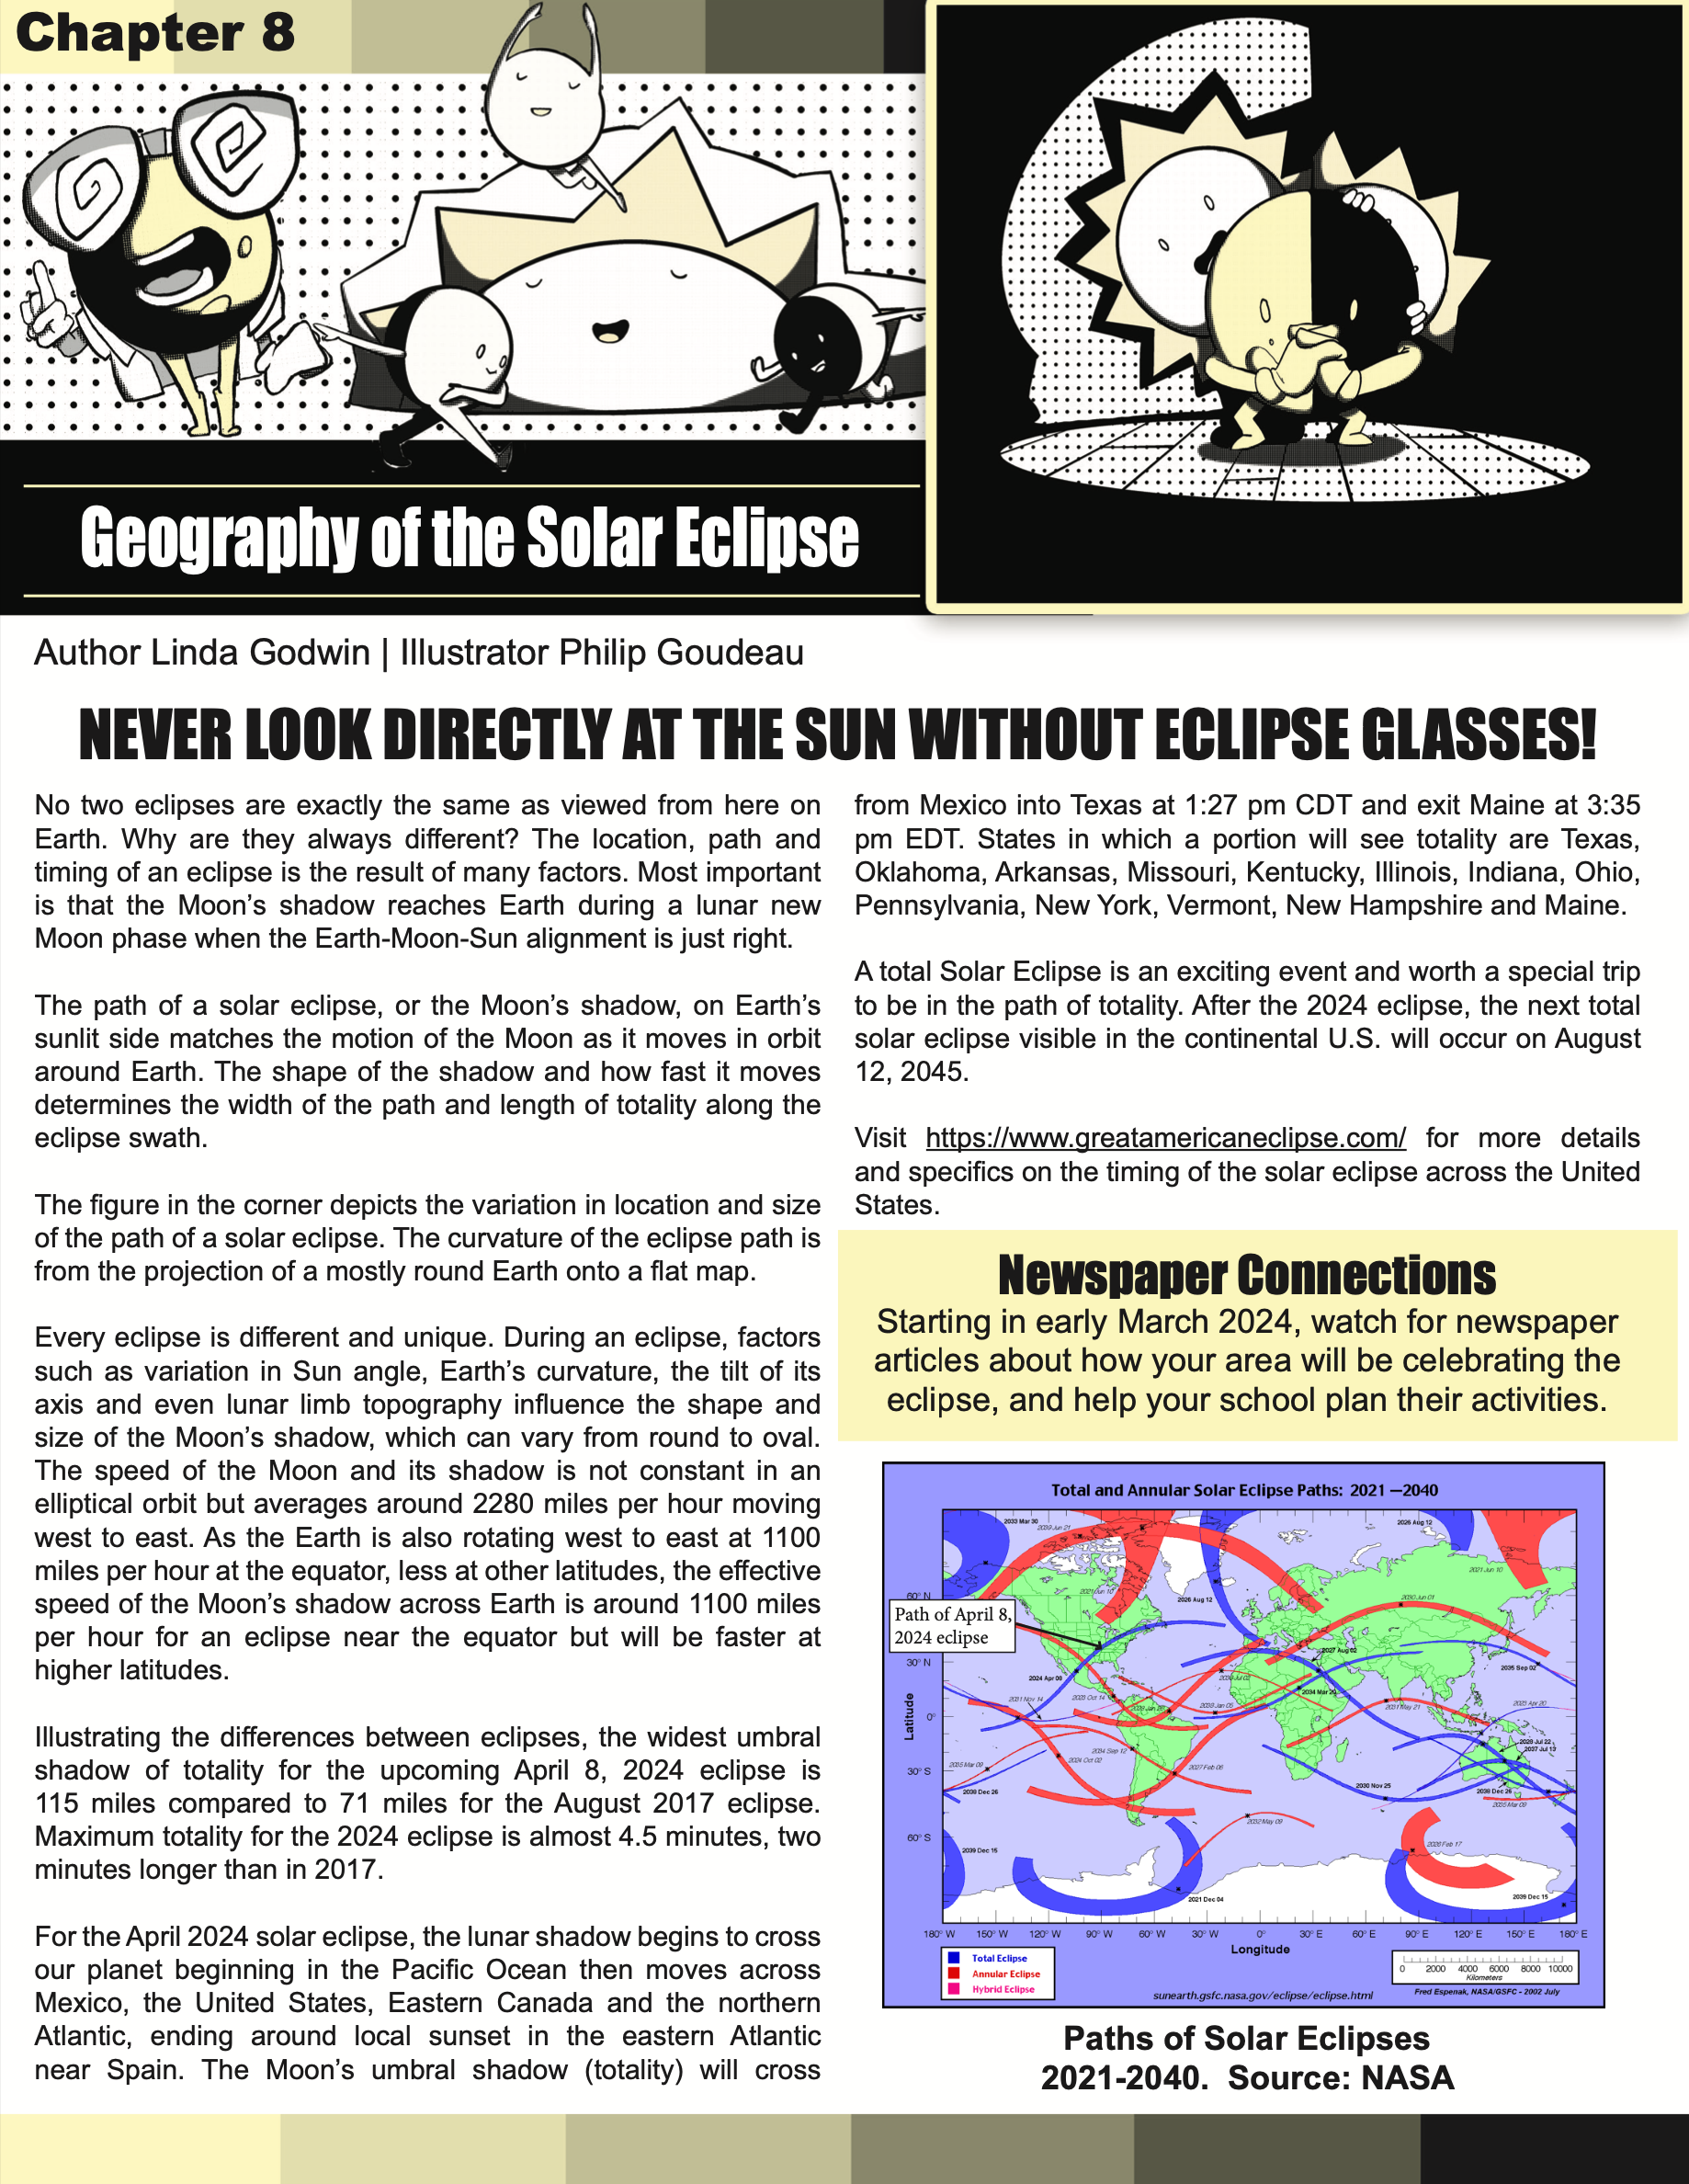 Chapter 8: Geography of the Solar Eclipse